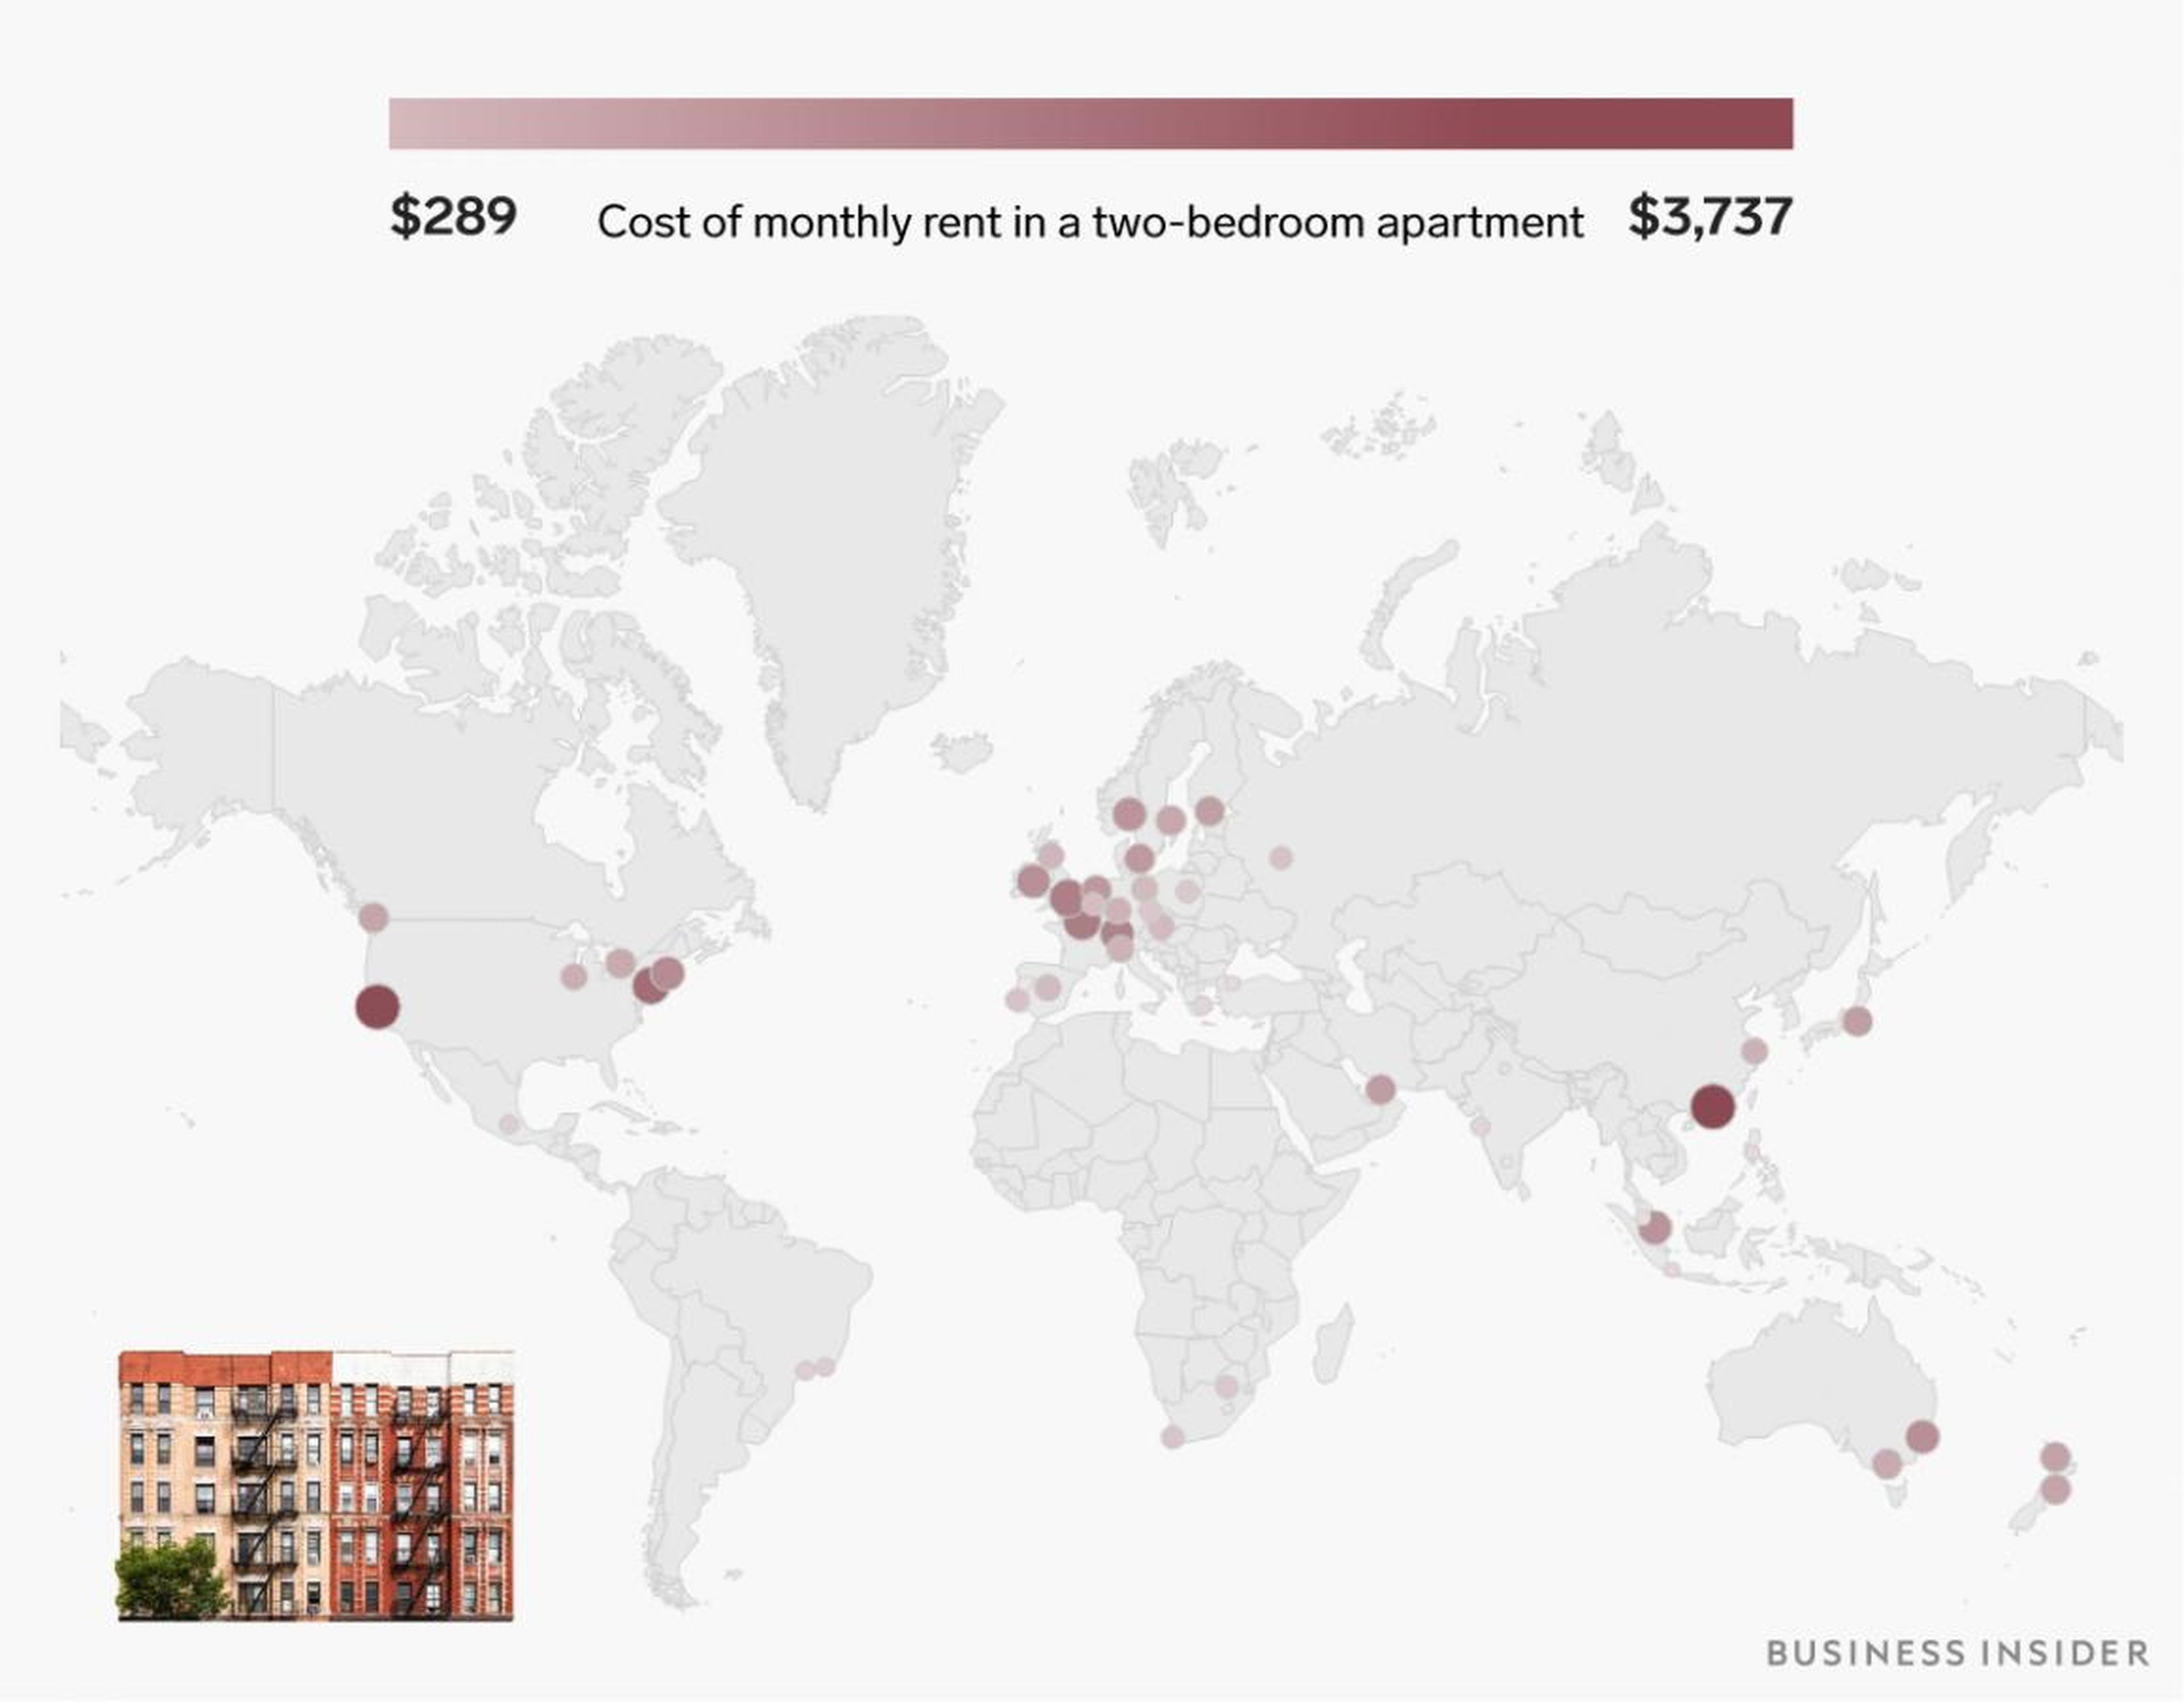 Monthly rent in a two-bedroom apartment ranges from about $300 to over $3,700.